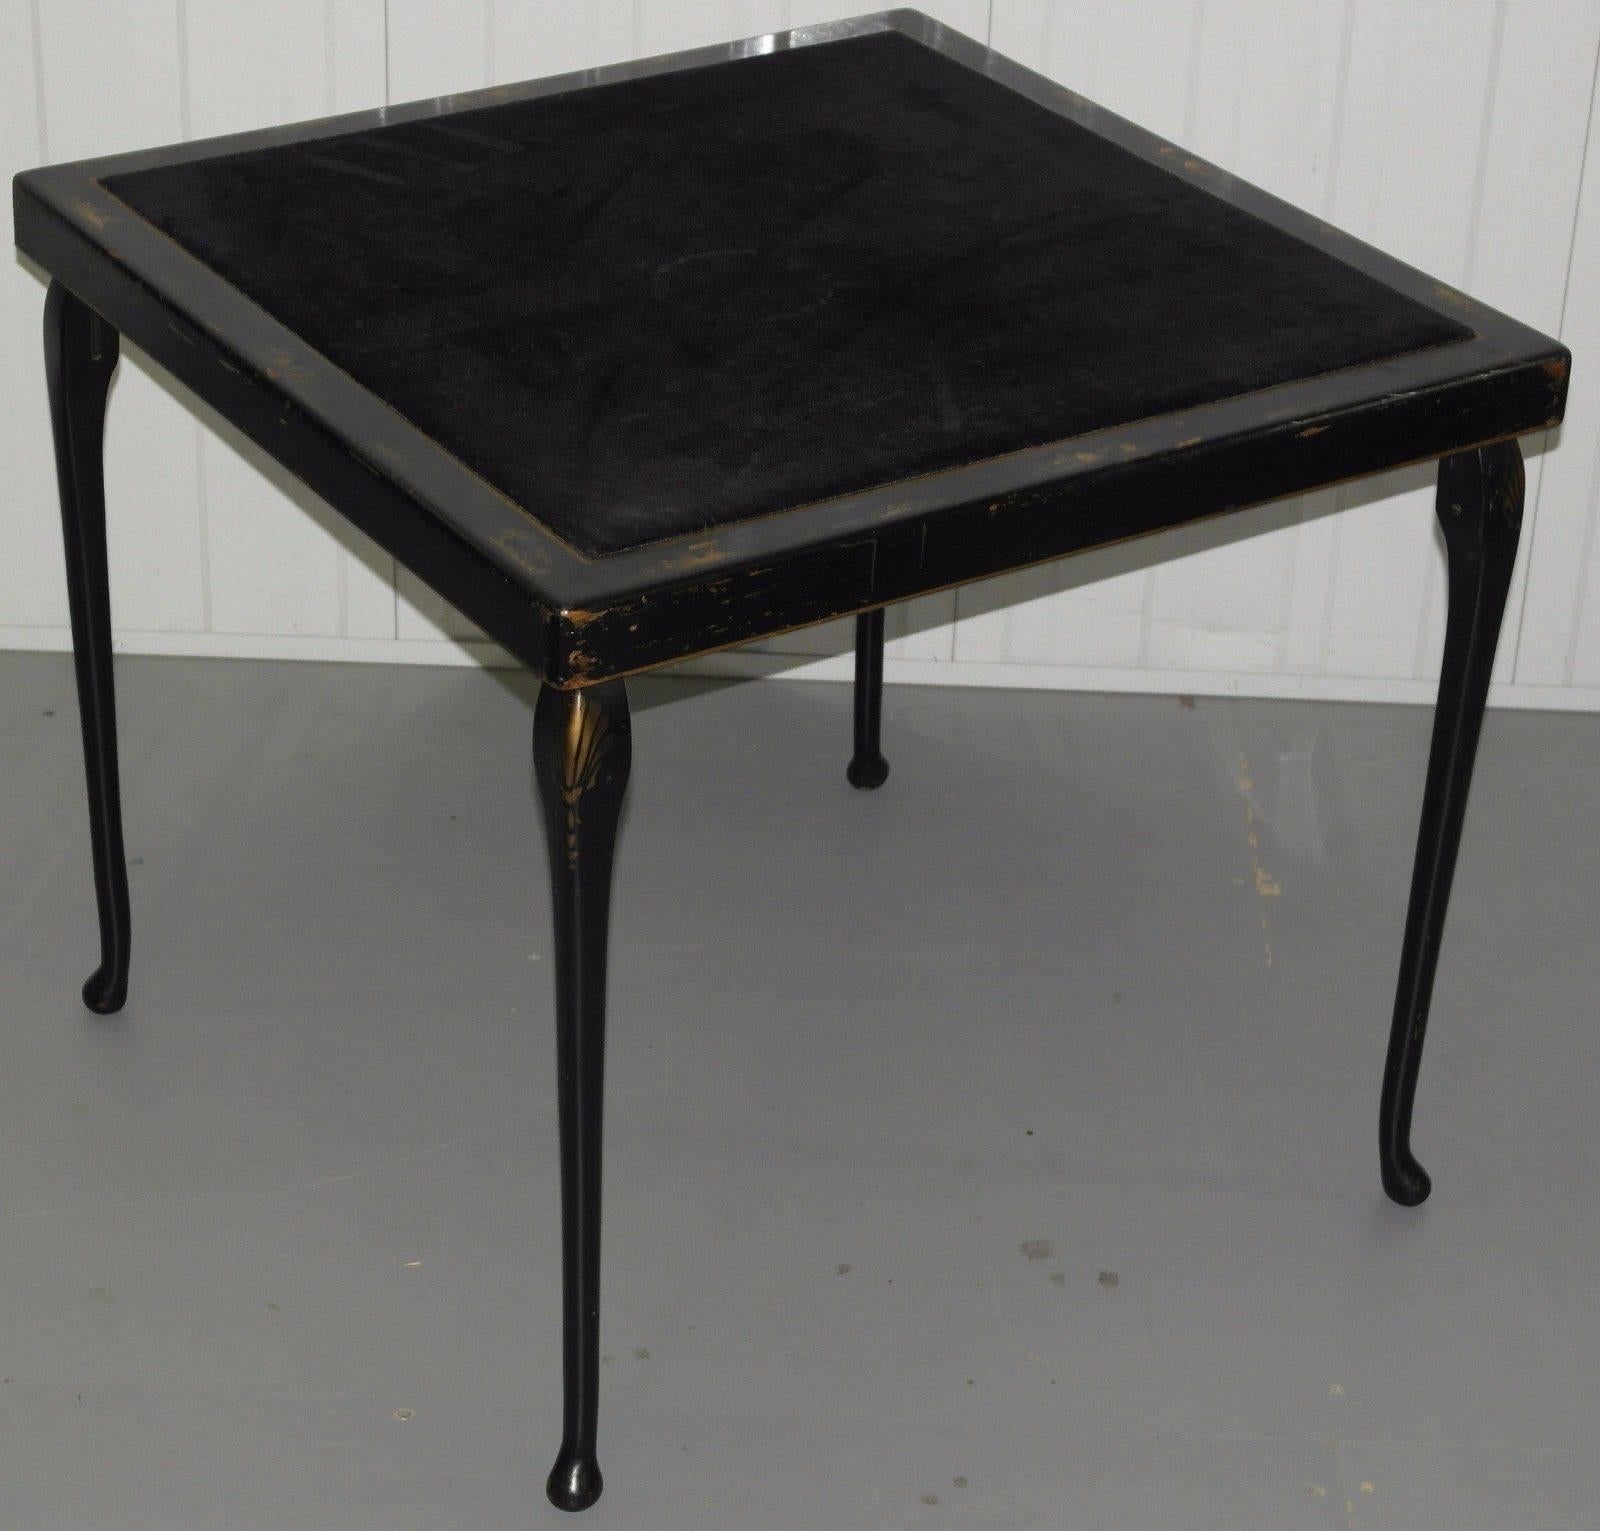 We are delighted to offer for sale this stunning pair of ebonised black handmade in England Campaign folding card tables with velvet surface in the Chinese style

Wow! What a lovely and rare pair of card tables, the hand-painted Chinese detailing